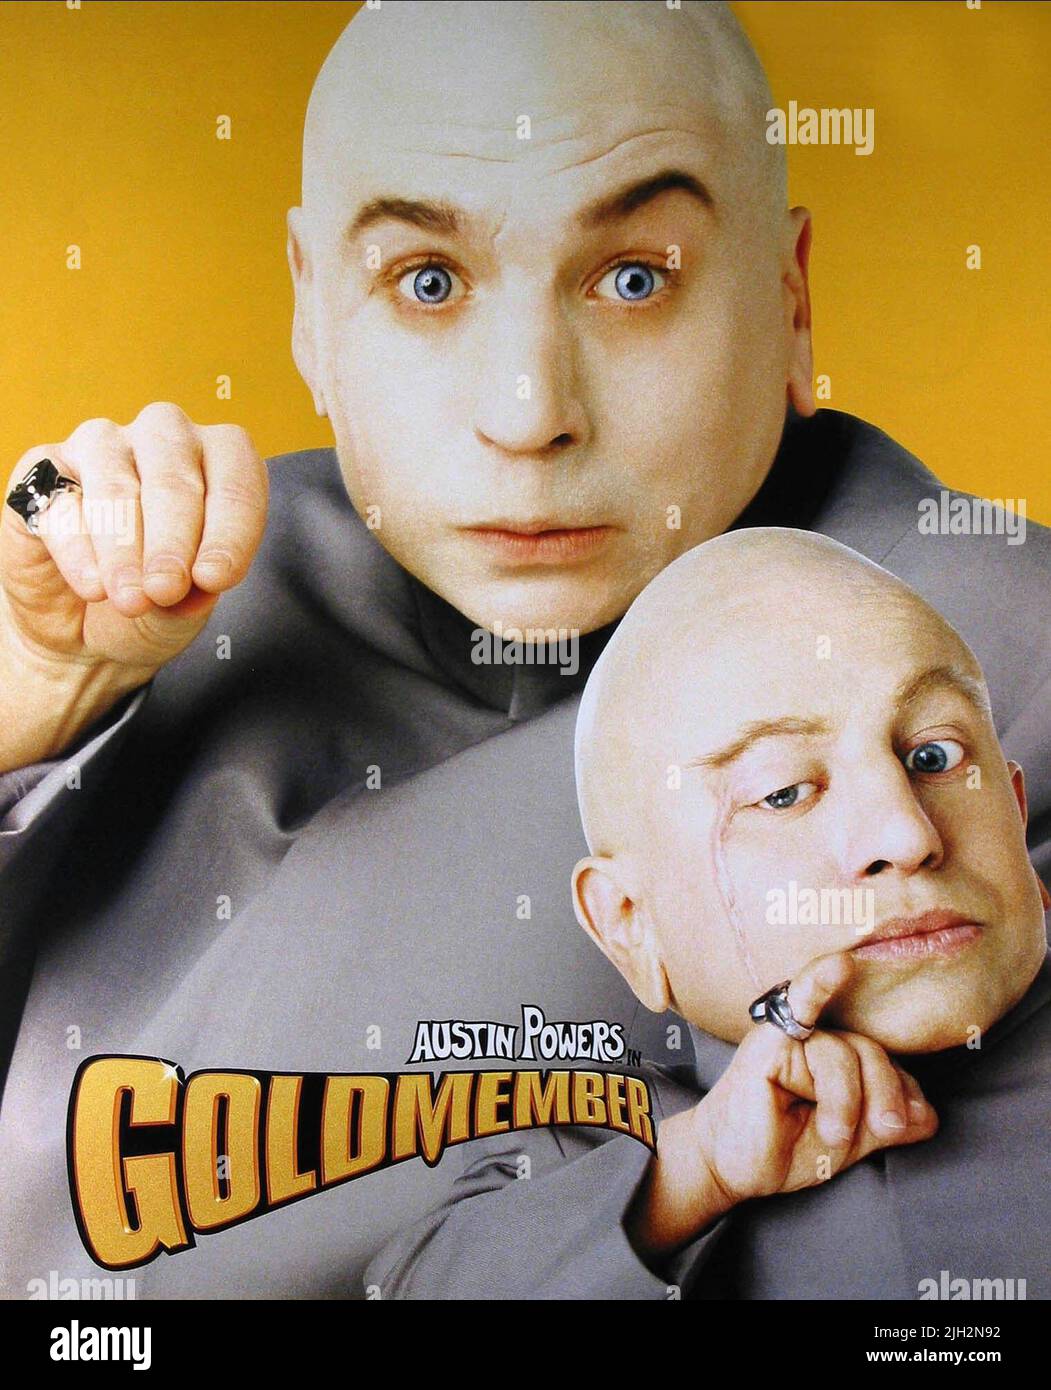 MYERS, TROYER, AUSTIN POWERS IN GOLDMEMBER, 2002 Foto Stock